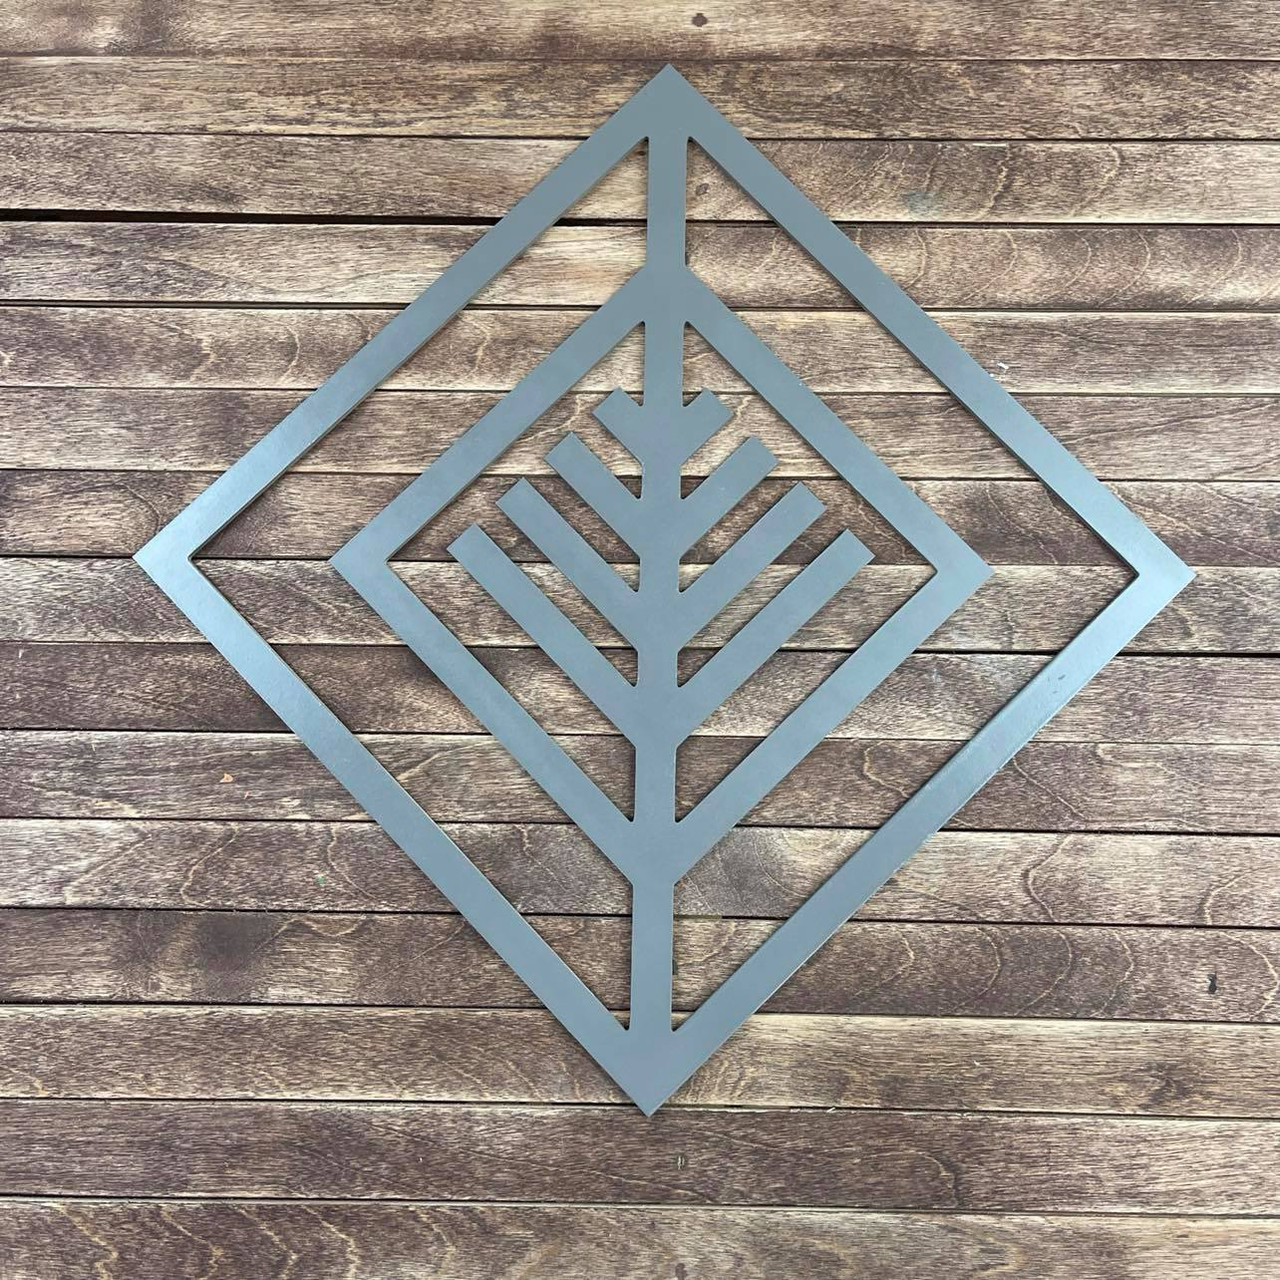 How to Stencil Reclaimed Wood Bohemian Wall Art